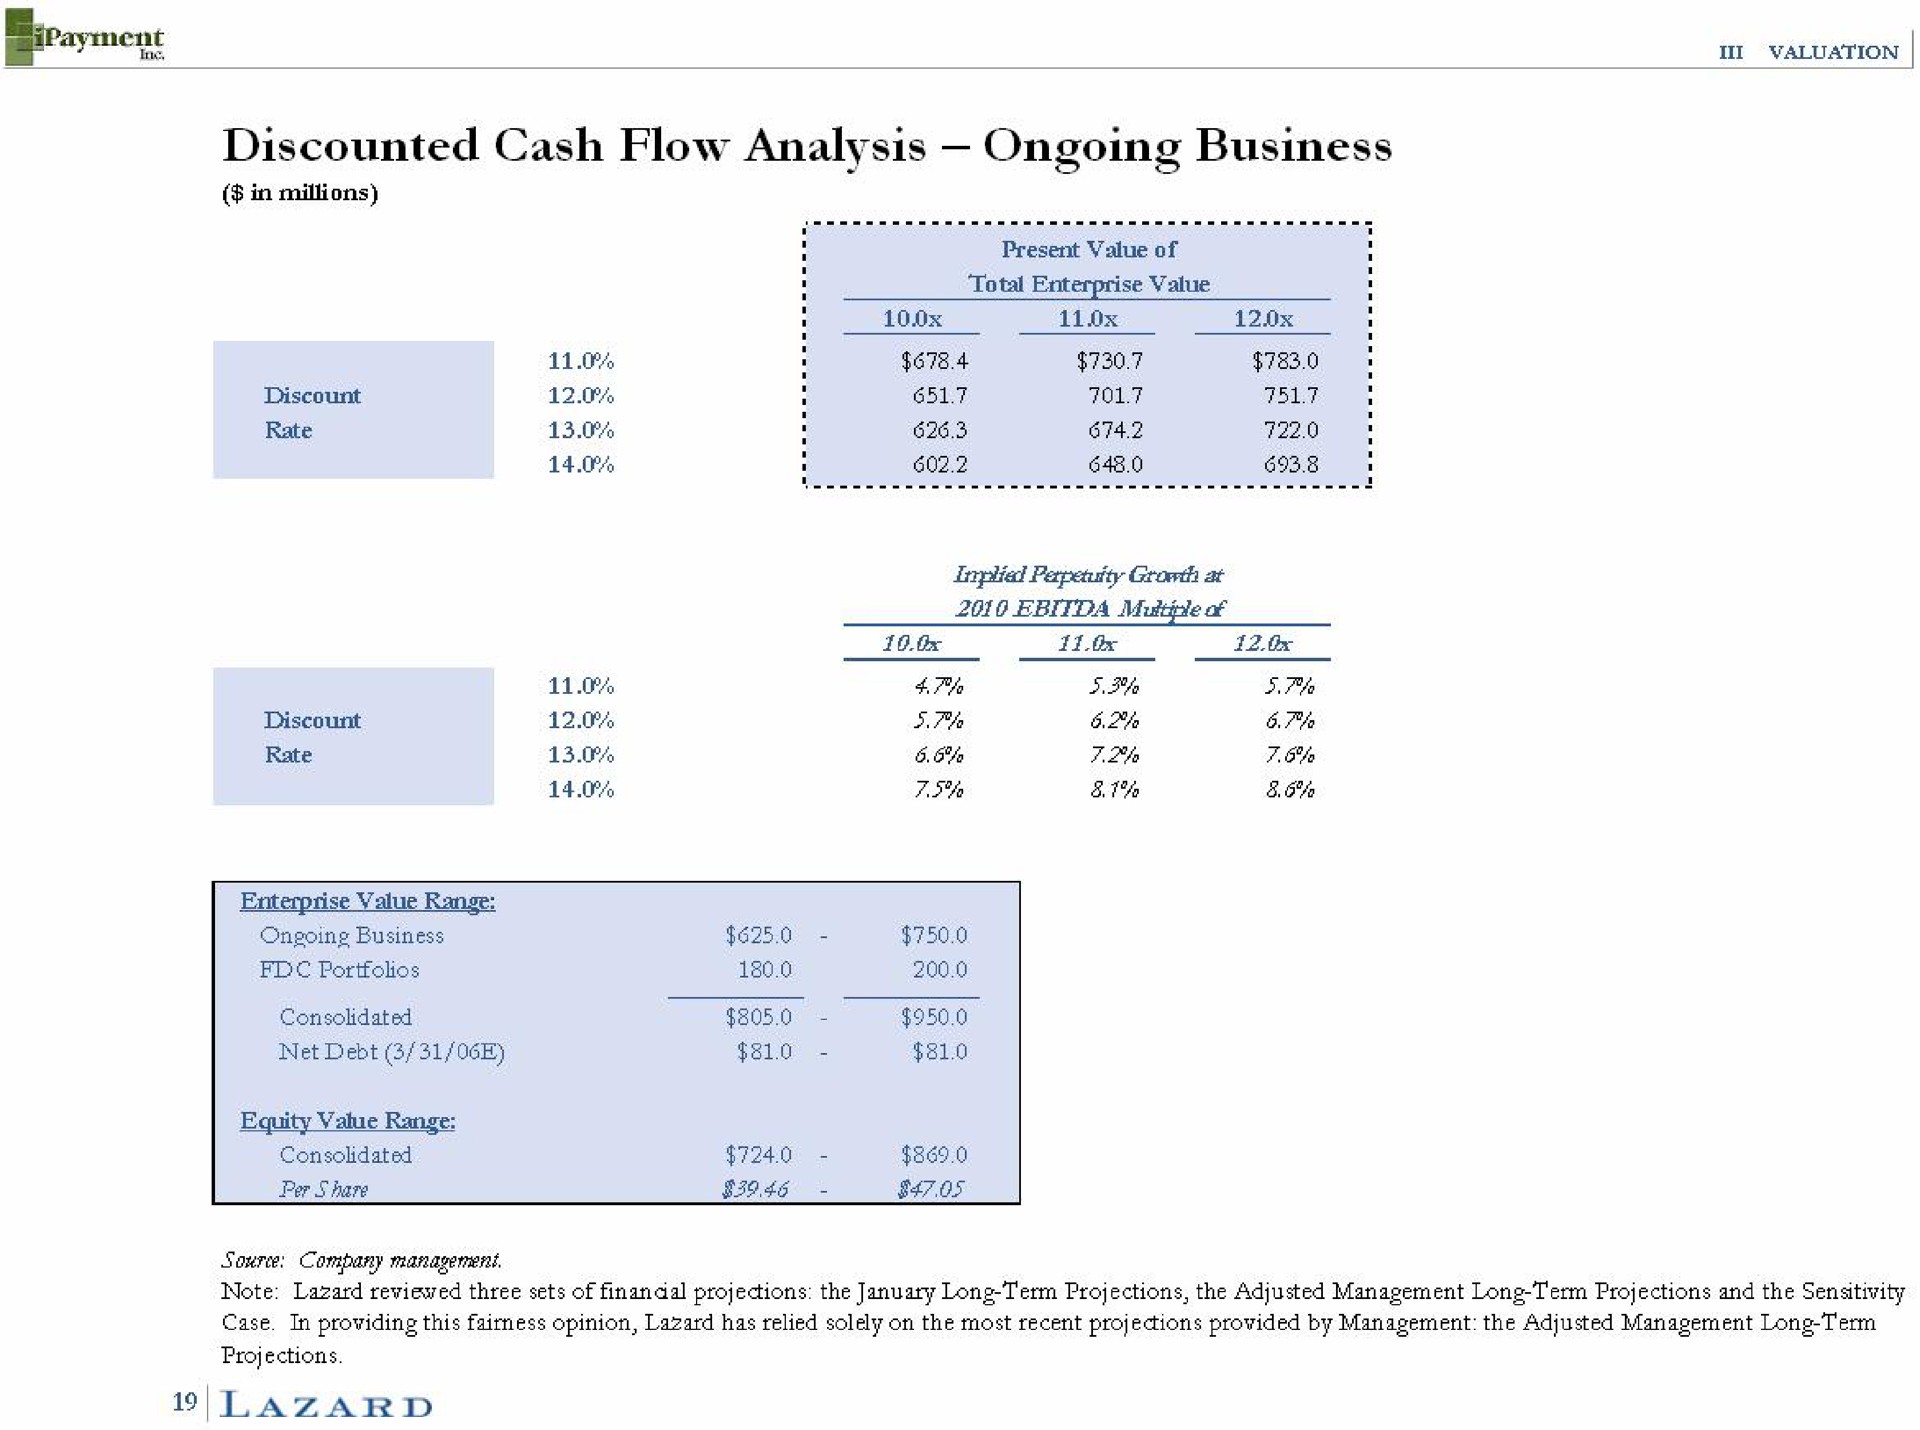 discounted cash flow analysis ongoing business resent valine of i | Lazard